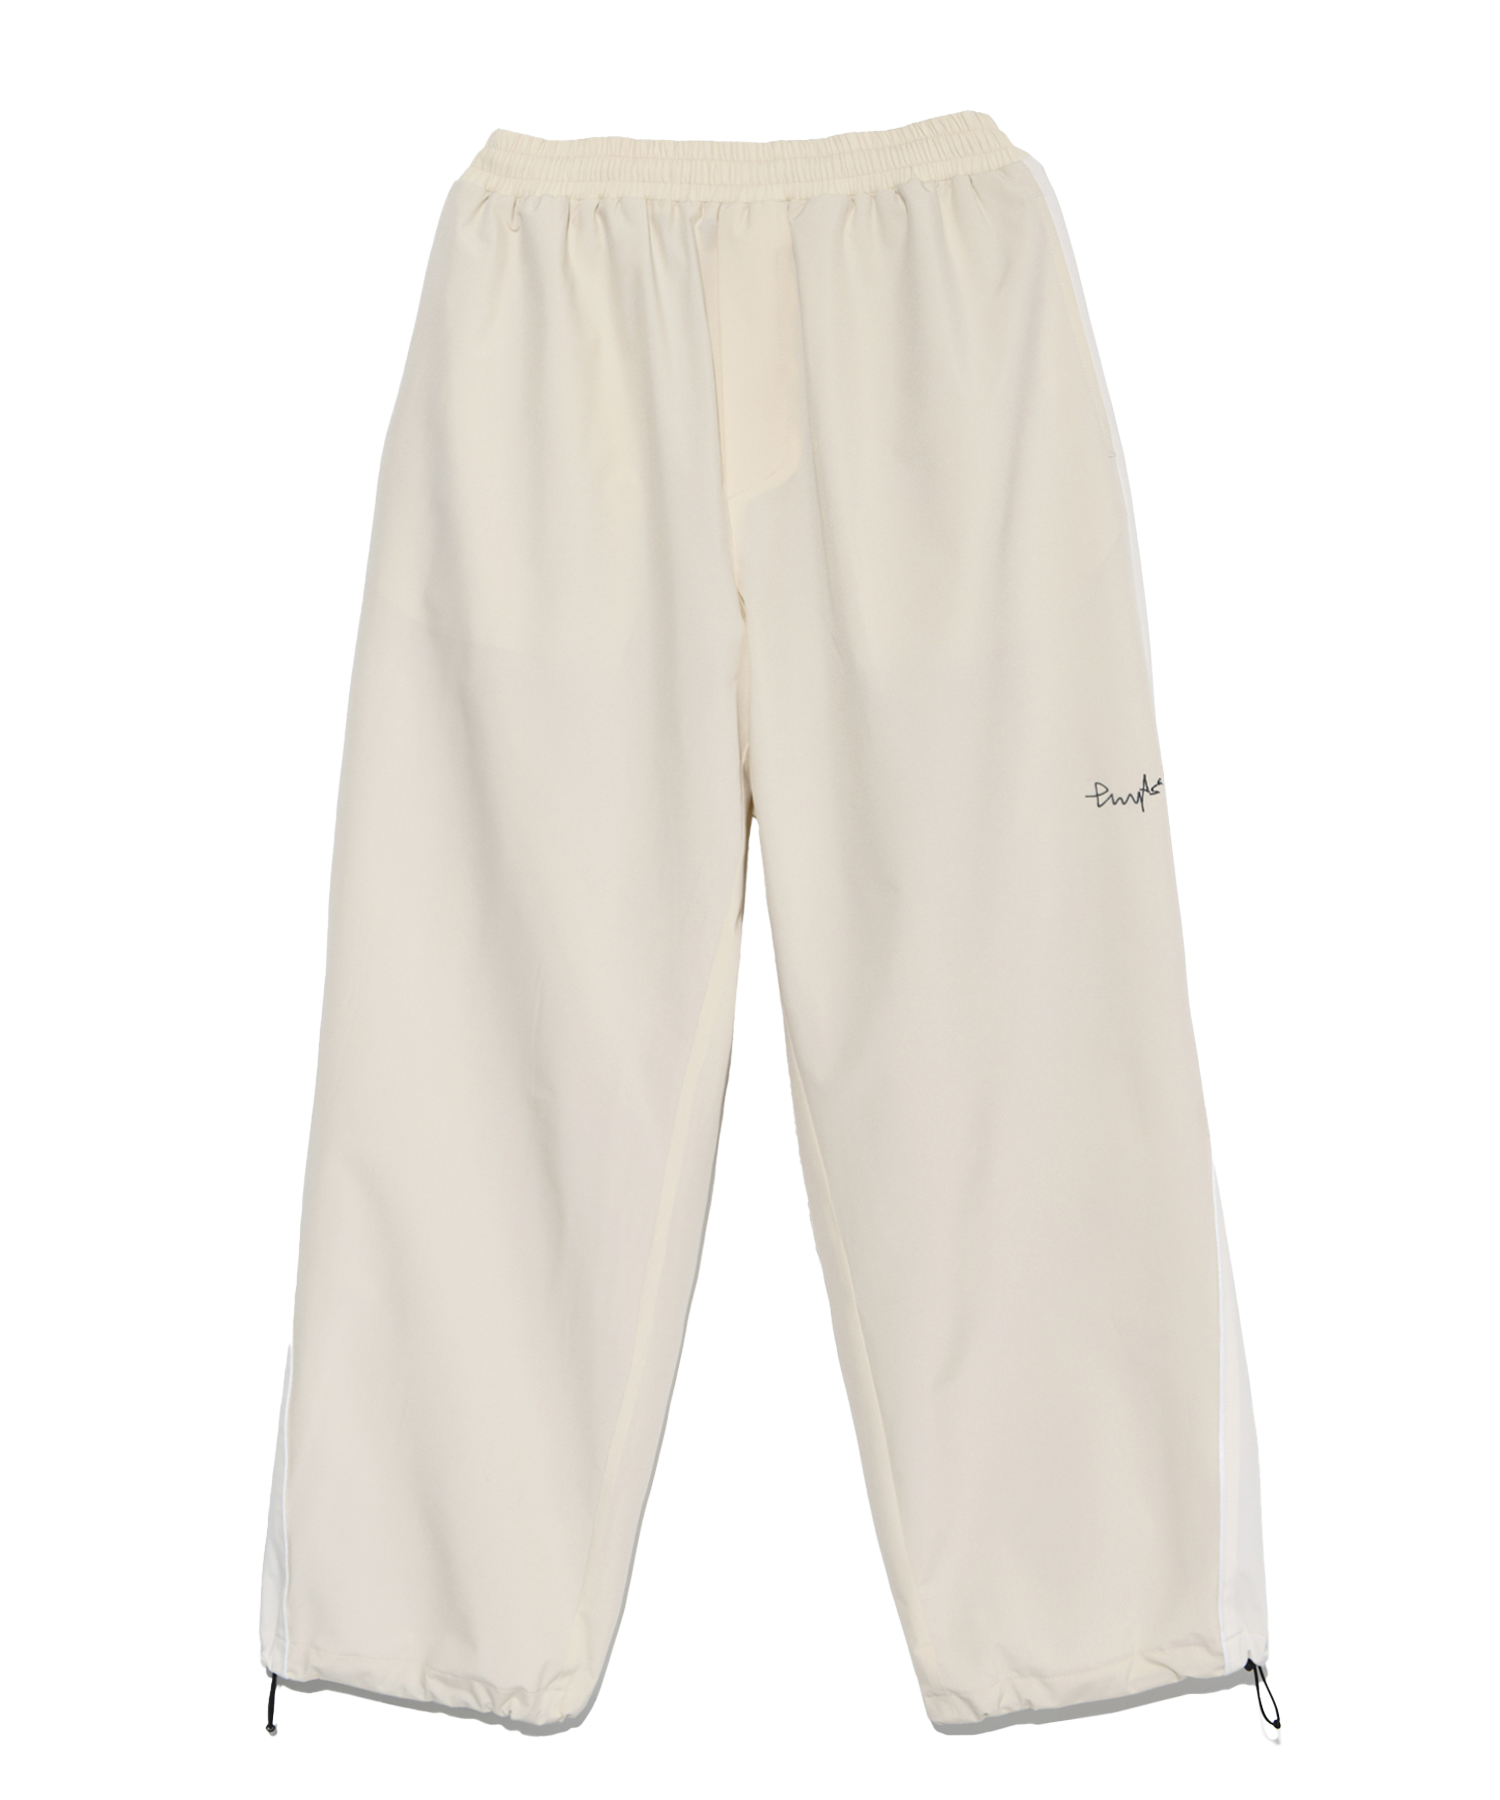 PHYPS® PIPING SIGN LOGO TRACK PANTS BEIGE